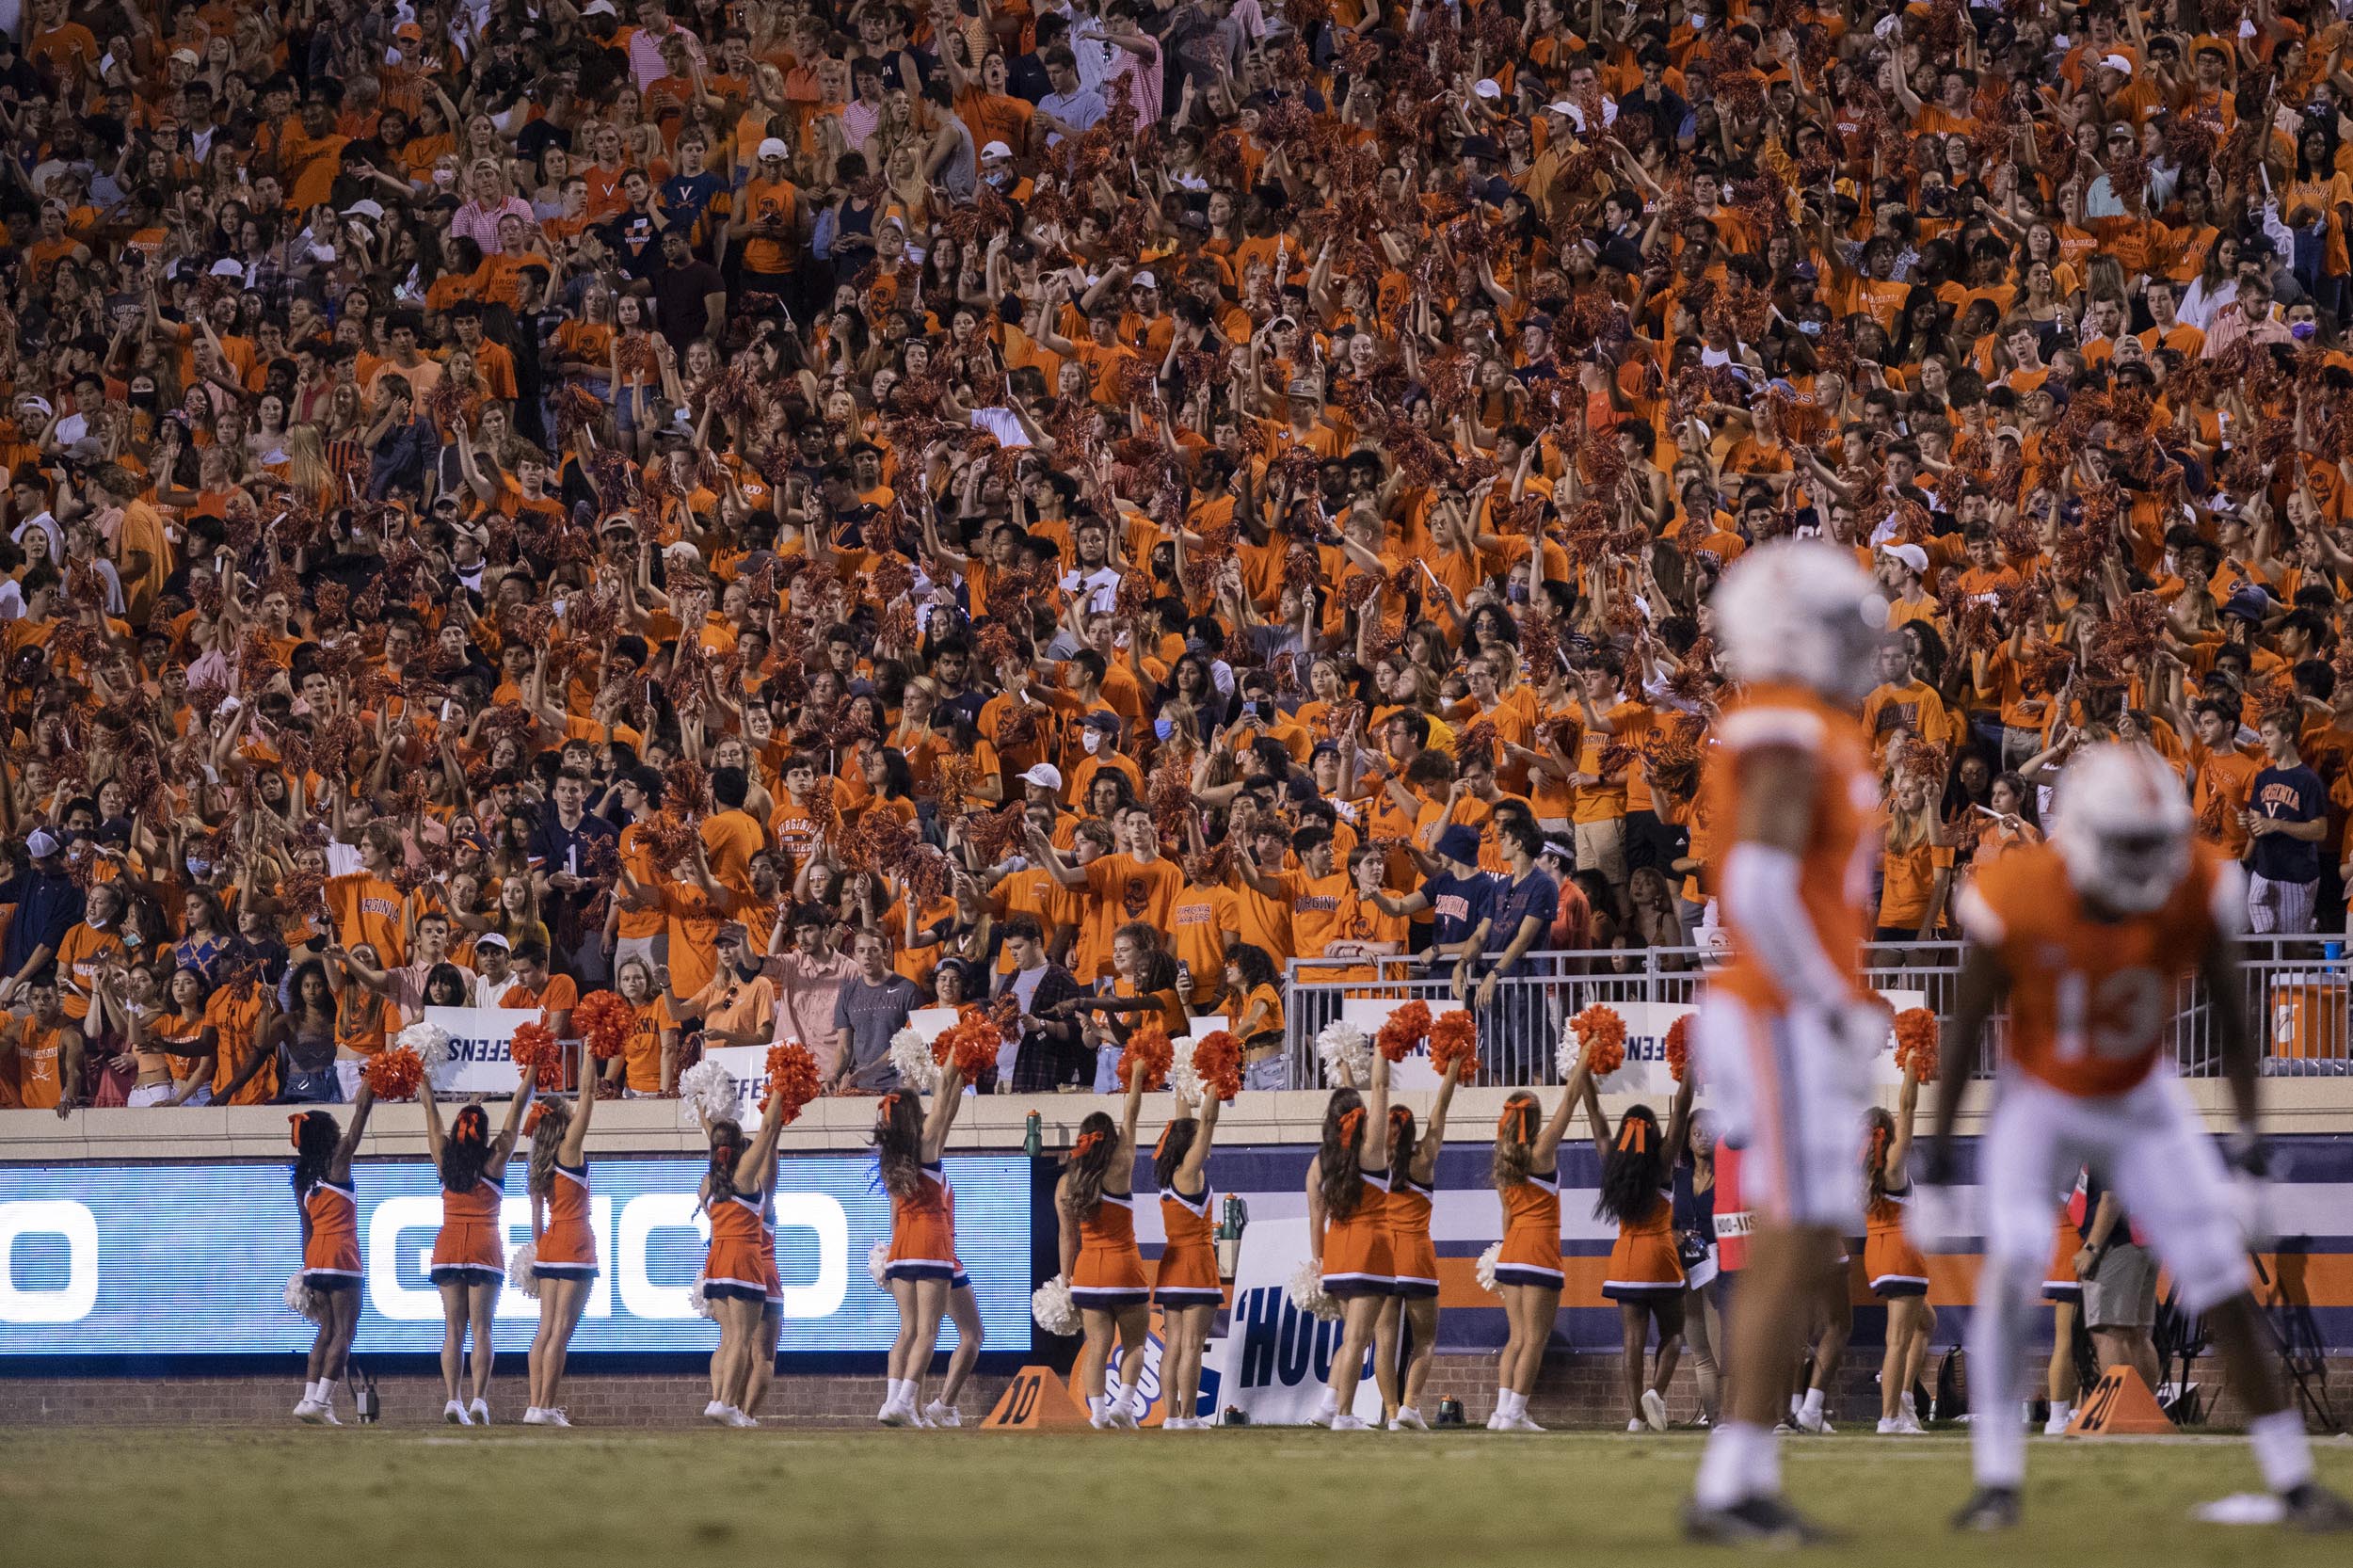 UVA crowd at football game in all orange while the cheerleaders cheer on the sidelines